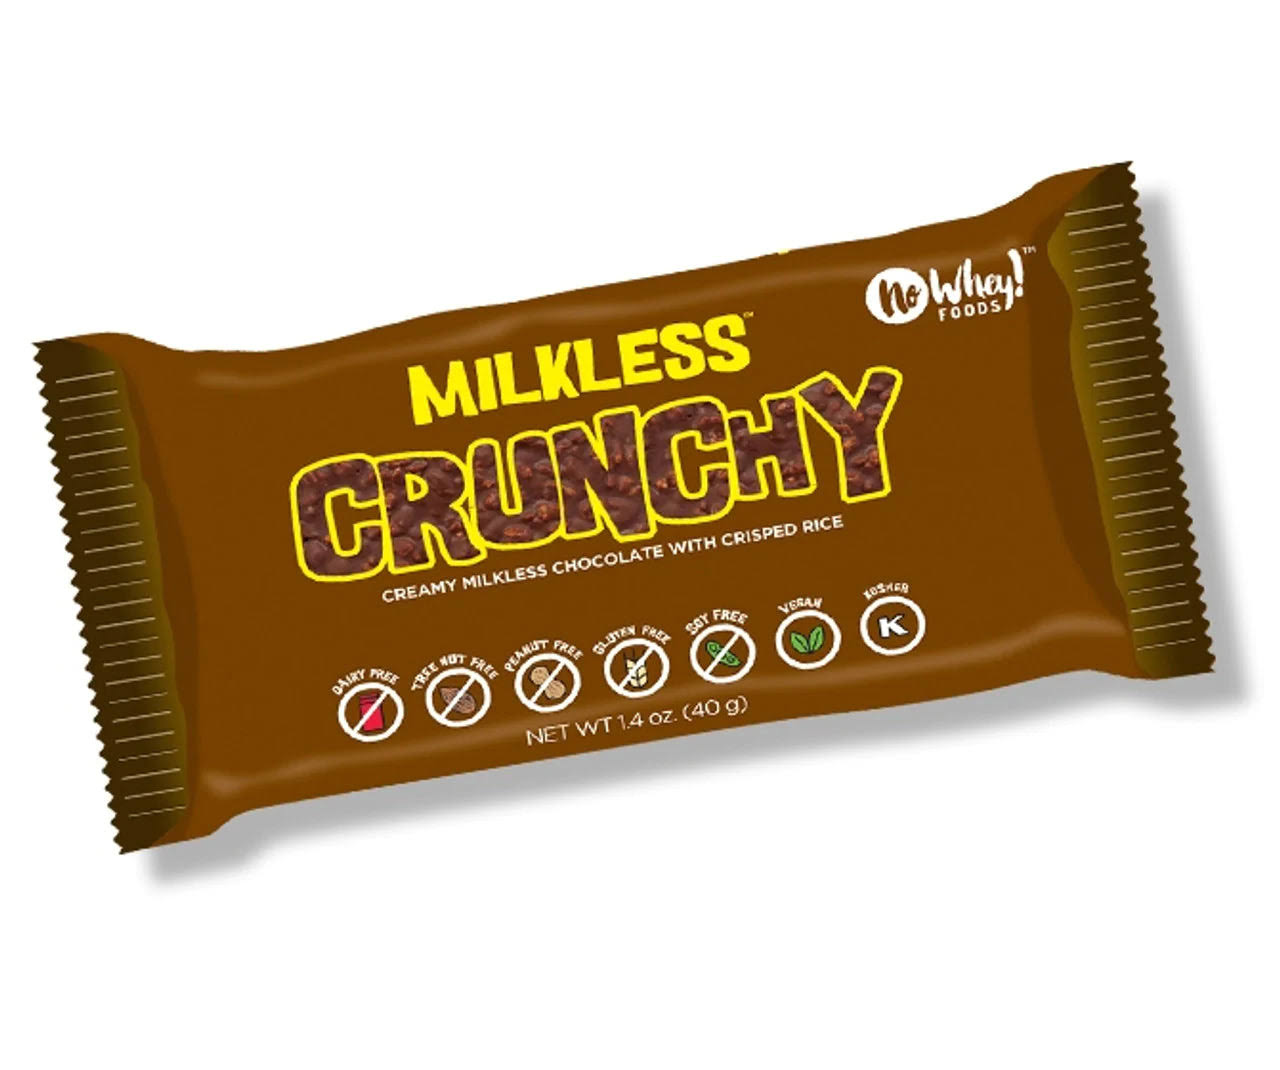 No Whey Foods Milk Free Crunchy Chocolate Bars - 3 Pack - Besties Vegan Paradise - Delivered by Mercato